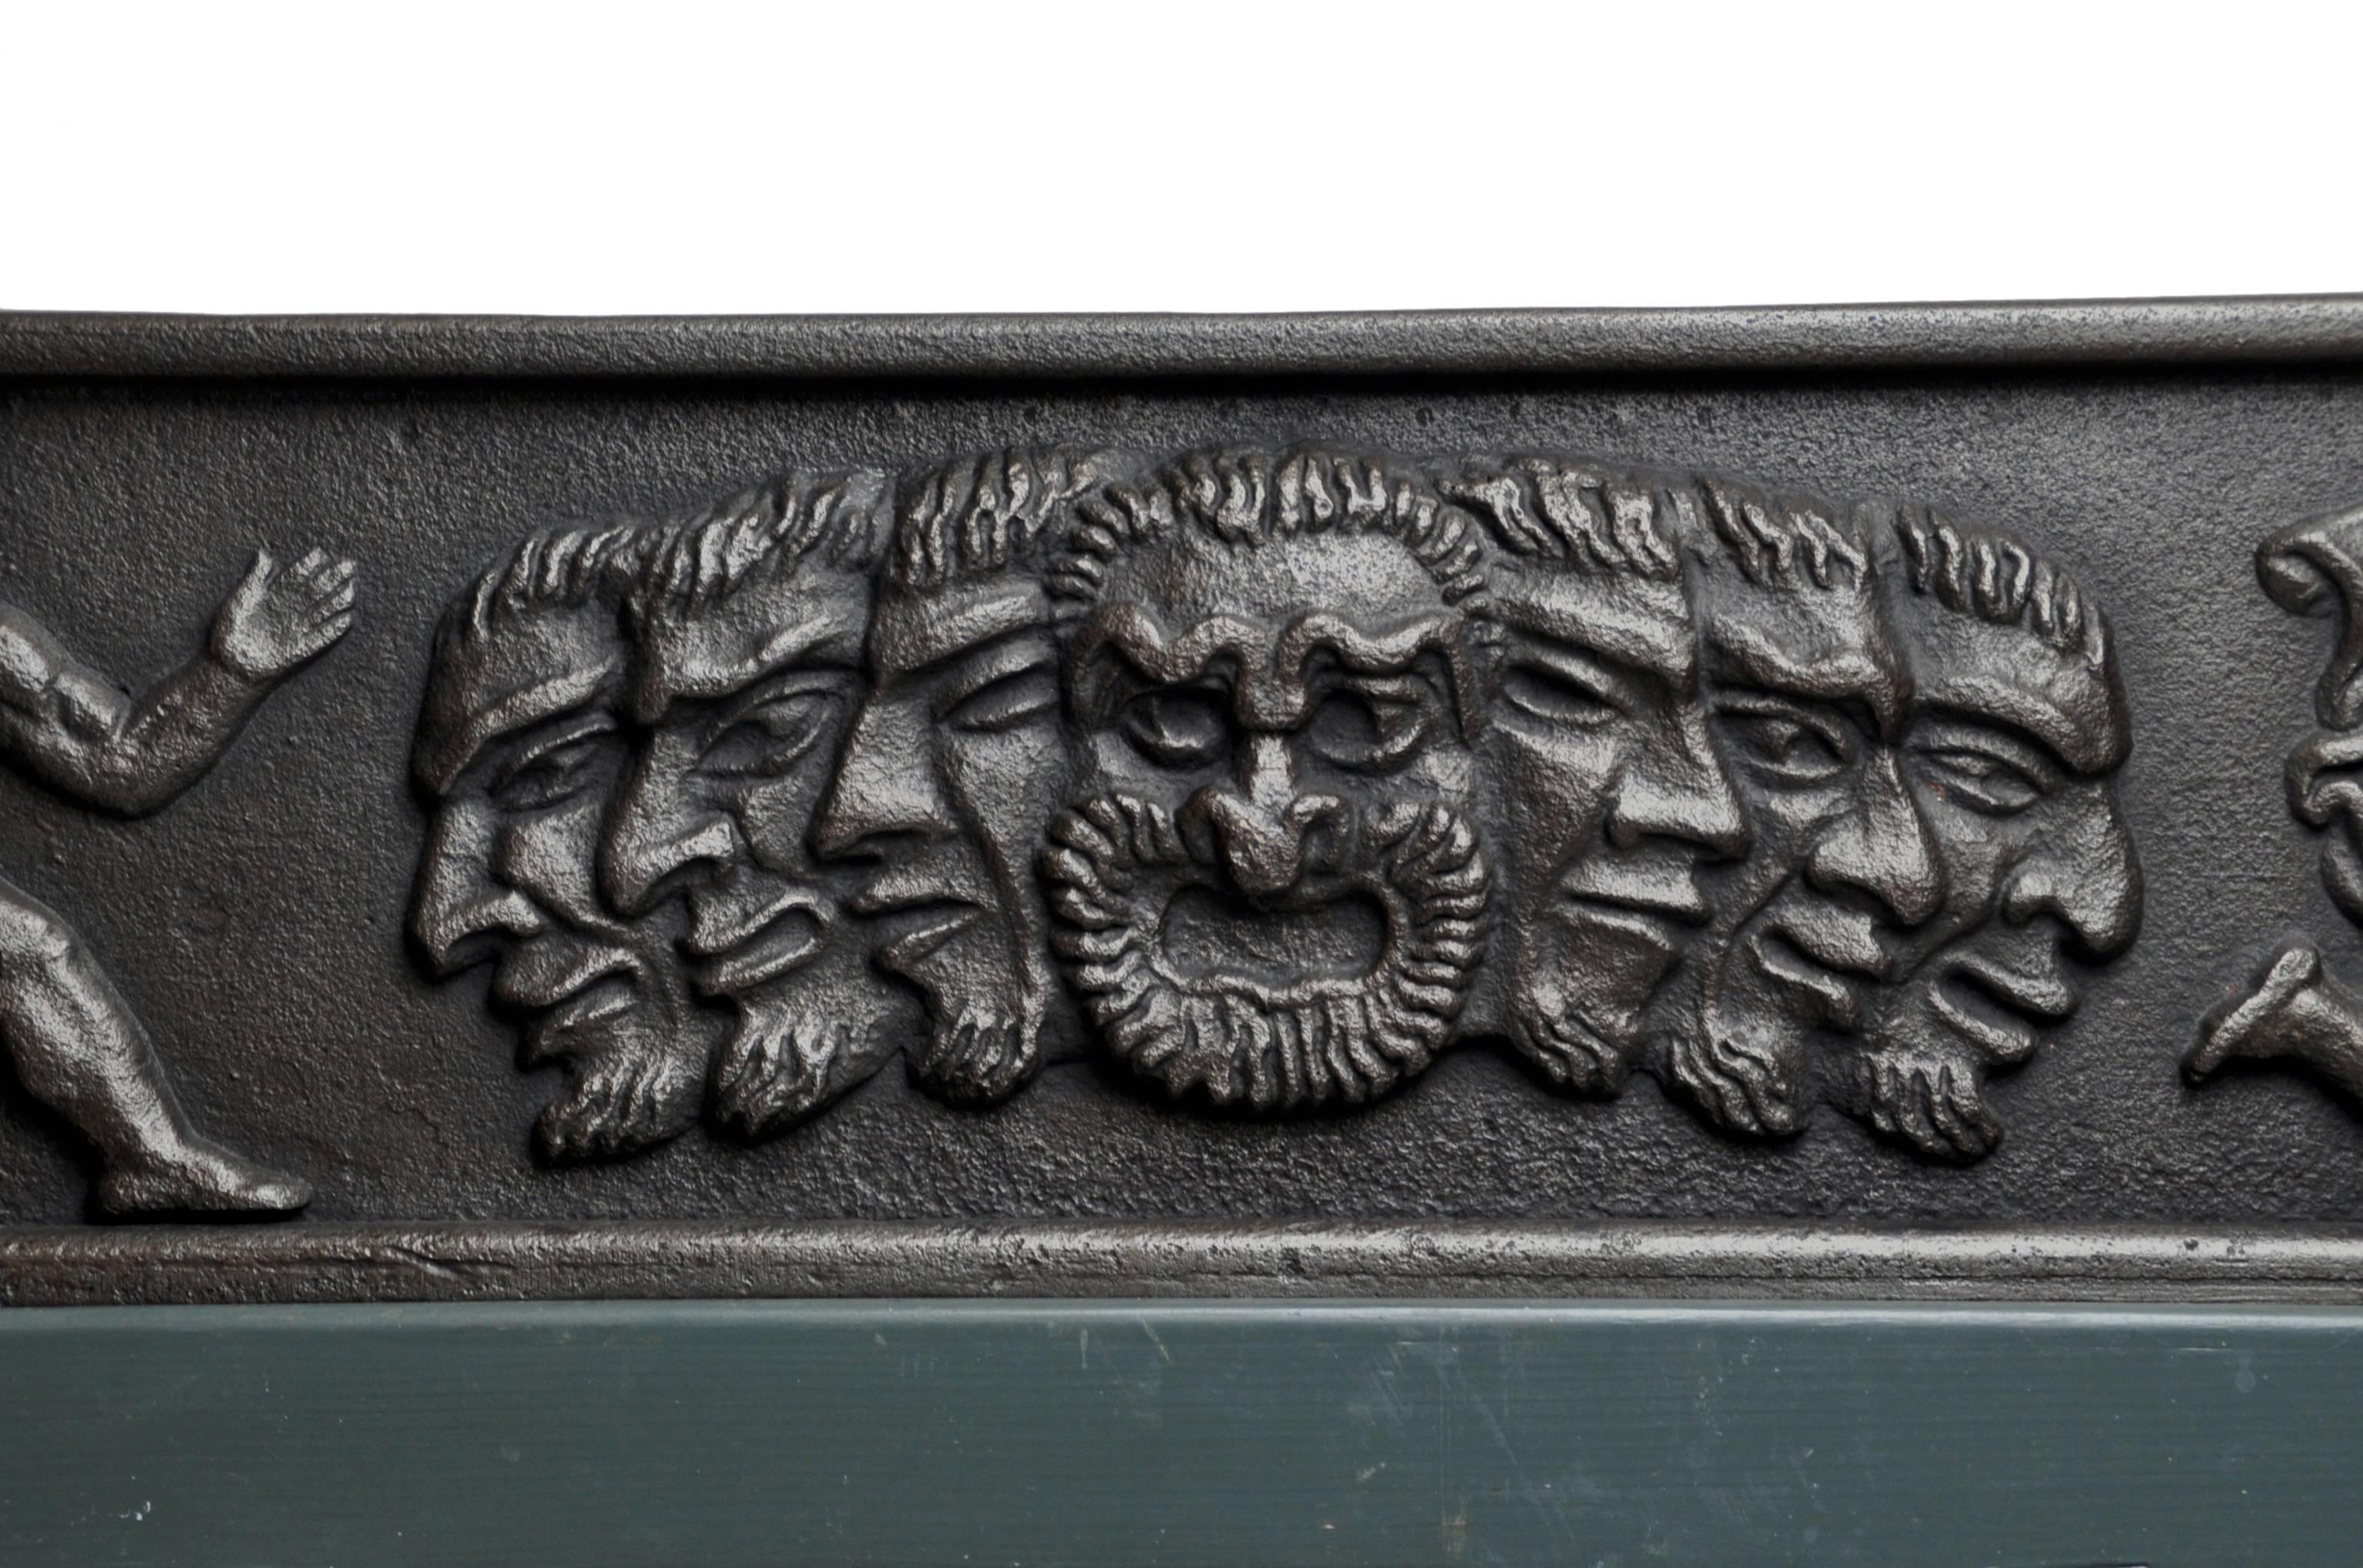 Jardinaire in thick cast iron depicting a classical motif supported by a neoclassical style X frame base with bronze medallions. The underlying wood appears to be painted pine. 
This theatrical motif was first presented on the door lintel of the